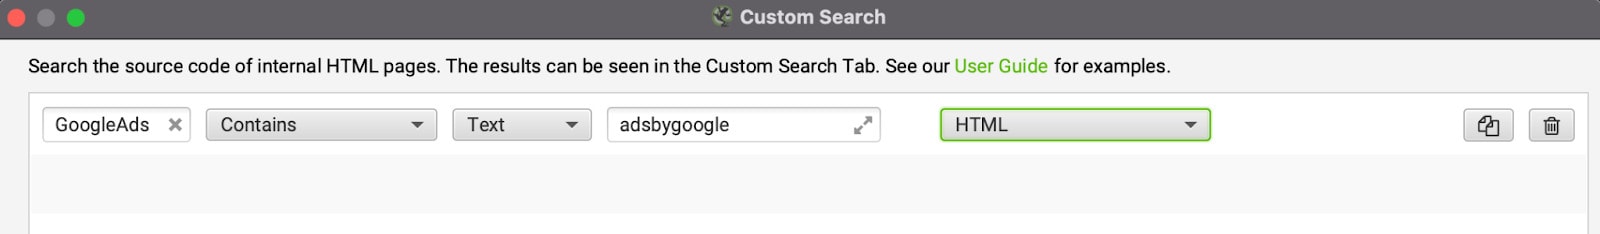 "Custom Search” Feature of ScreamingFrog